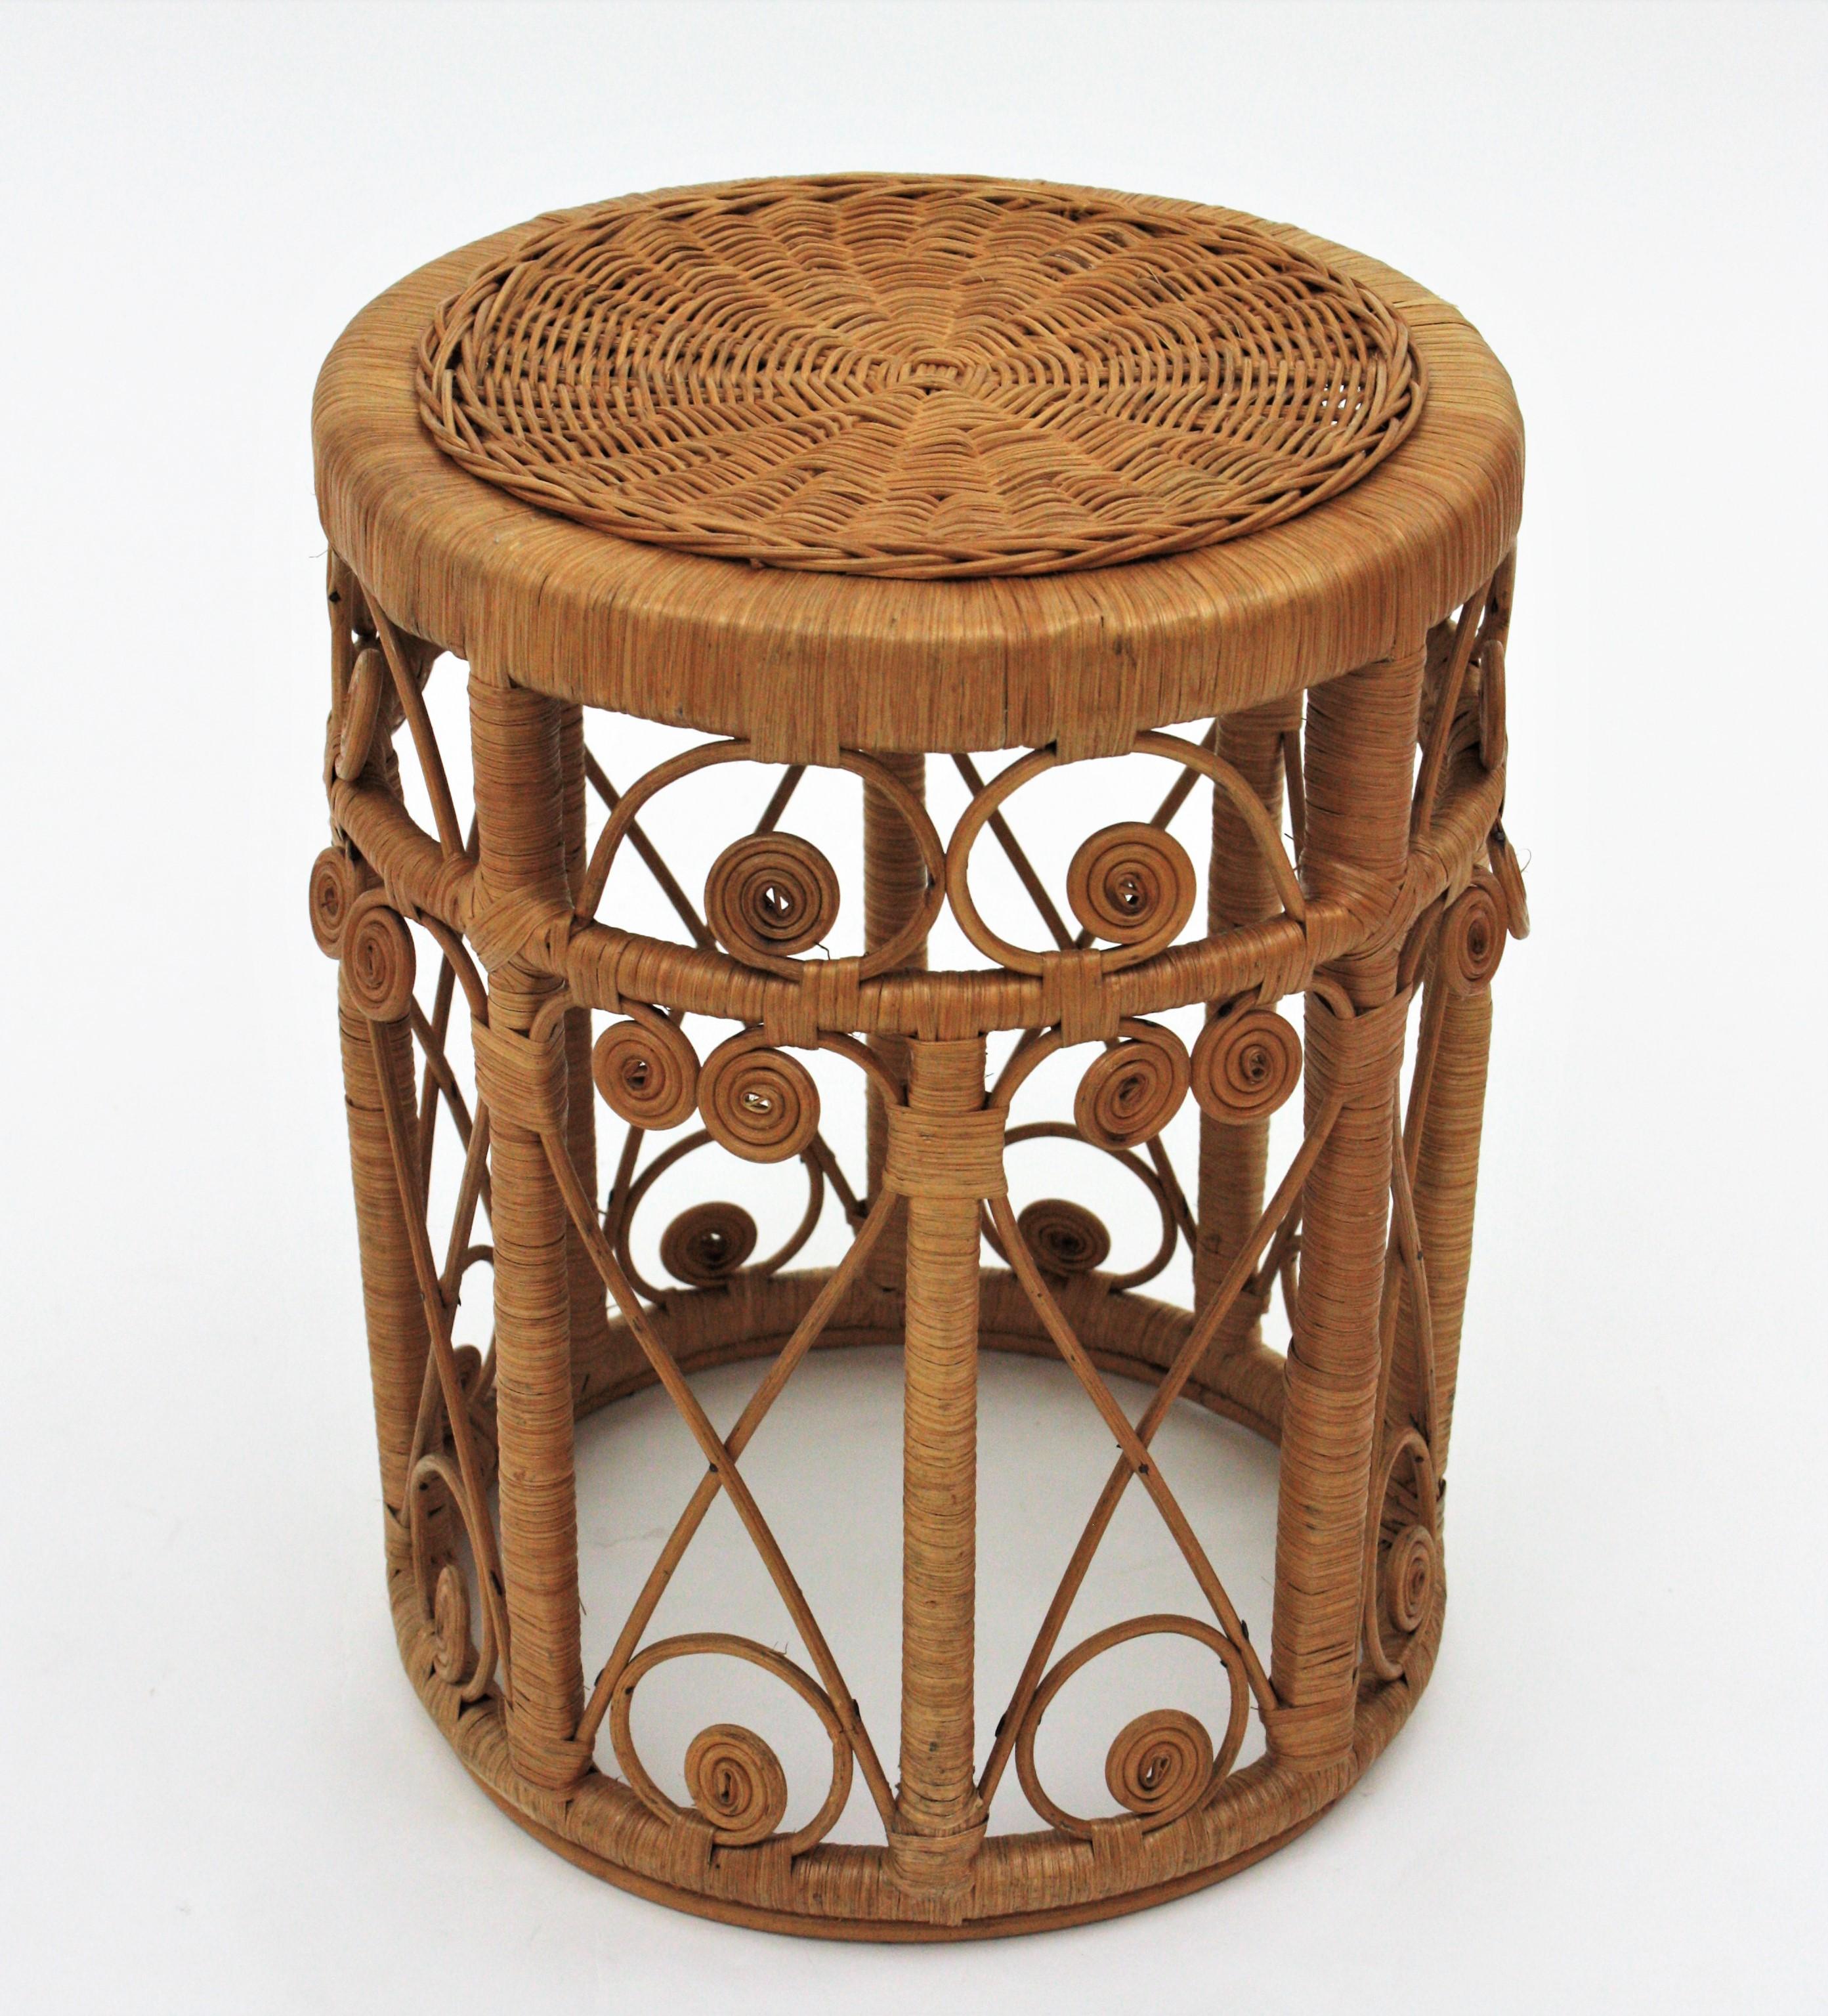 Hand-Crafted Rattan Round Stool or End Table with Filigree Details, 1960s